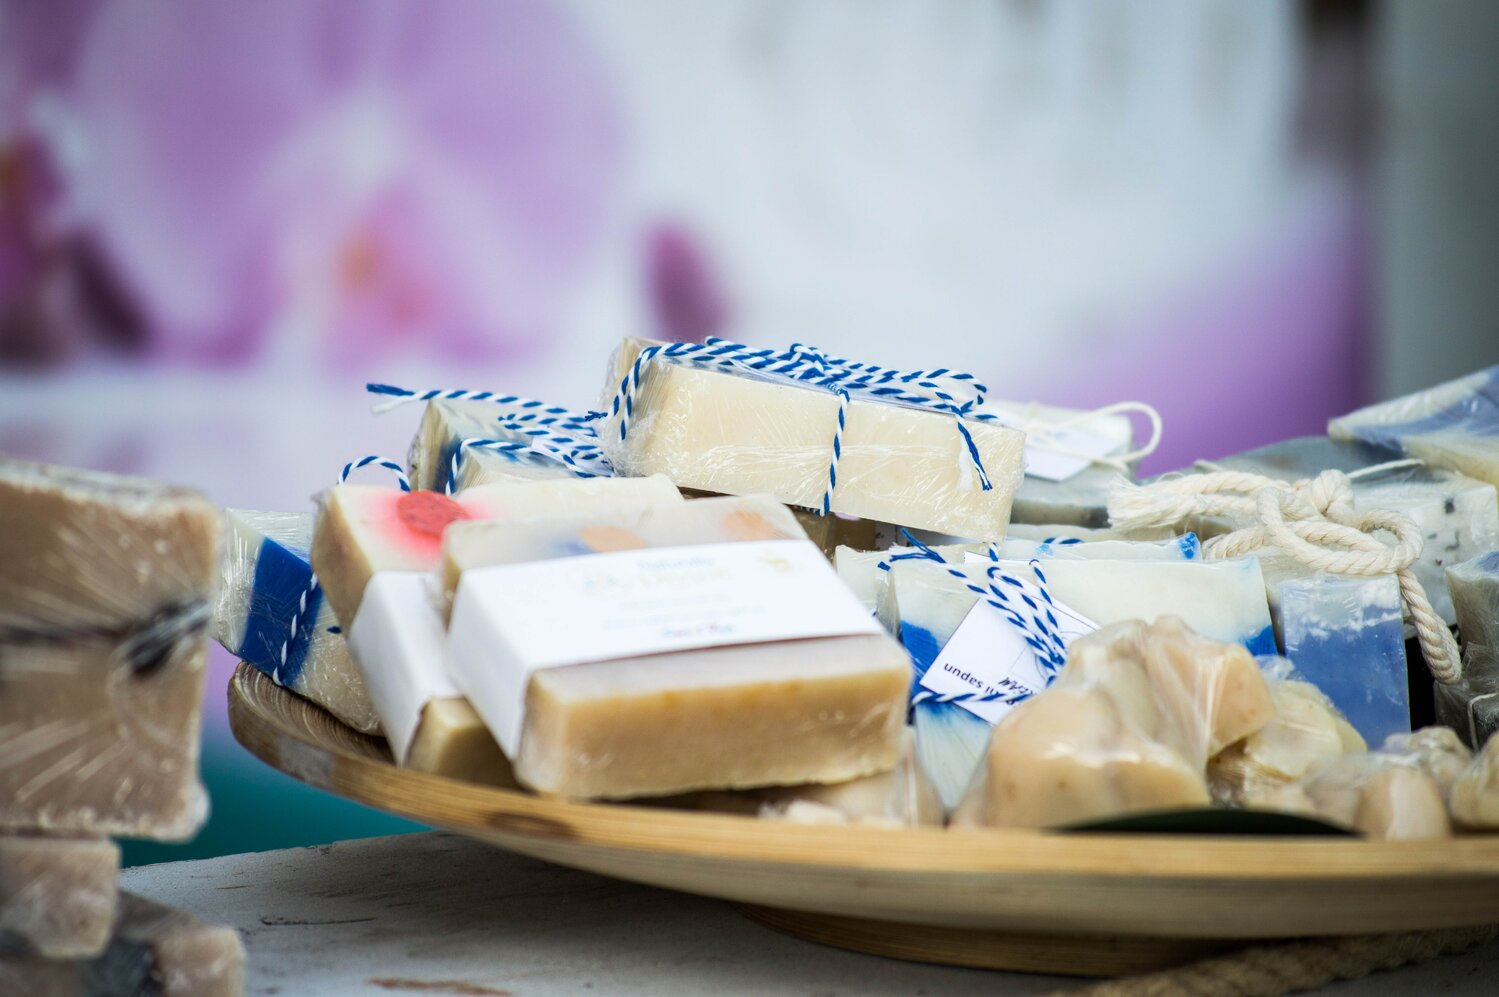 Handmade soaps can be found at farmers' markets and at Peck's Markets, both located throughout the region.